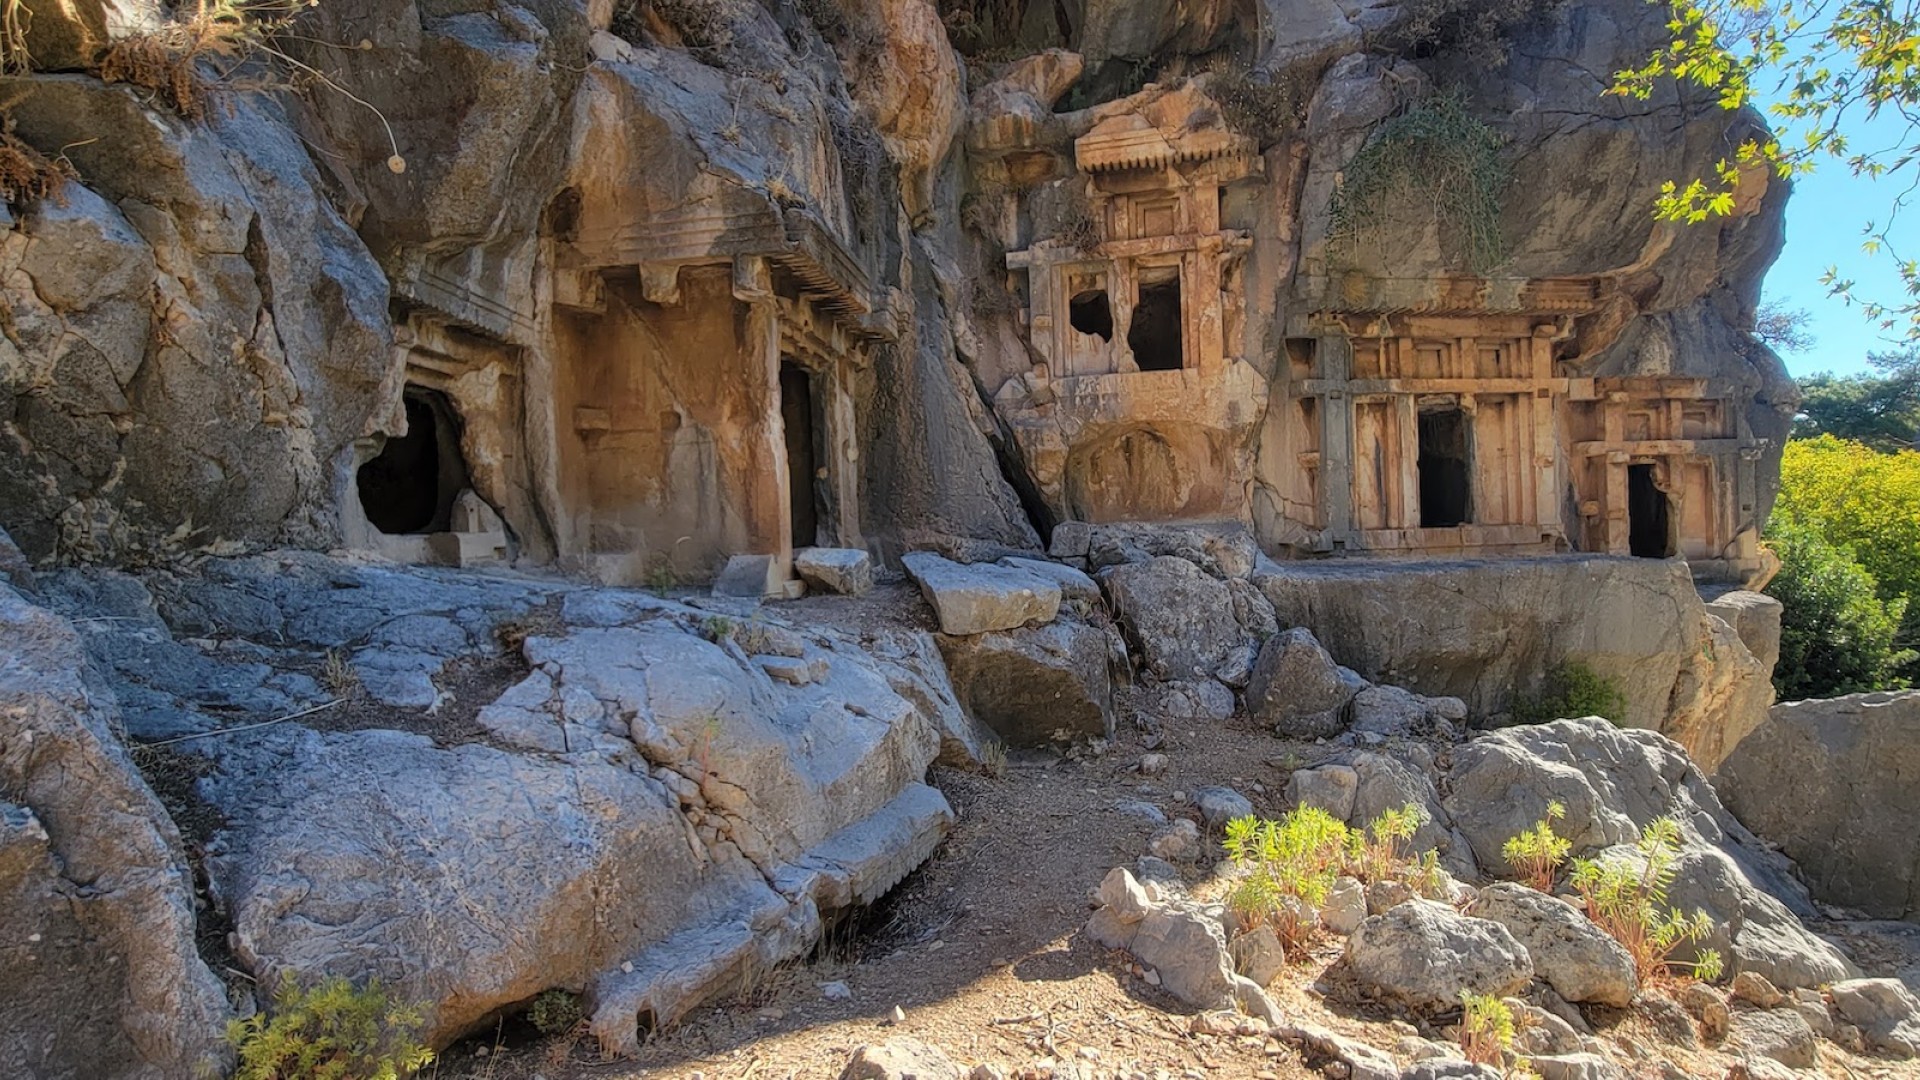 Hike up to ancient ruins in Turkey